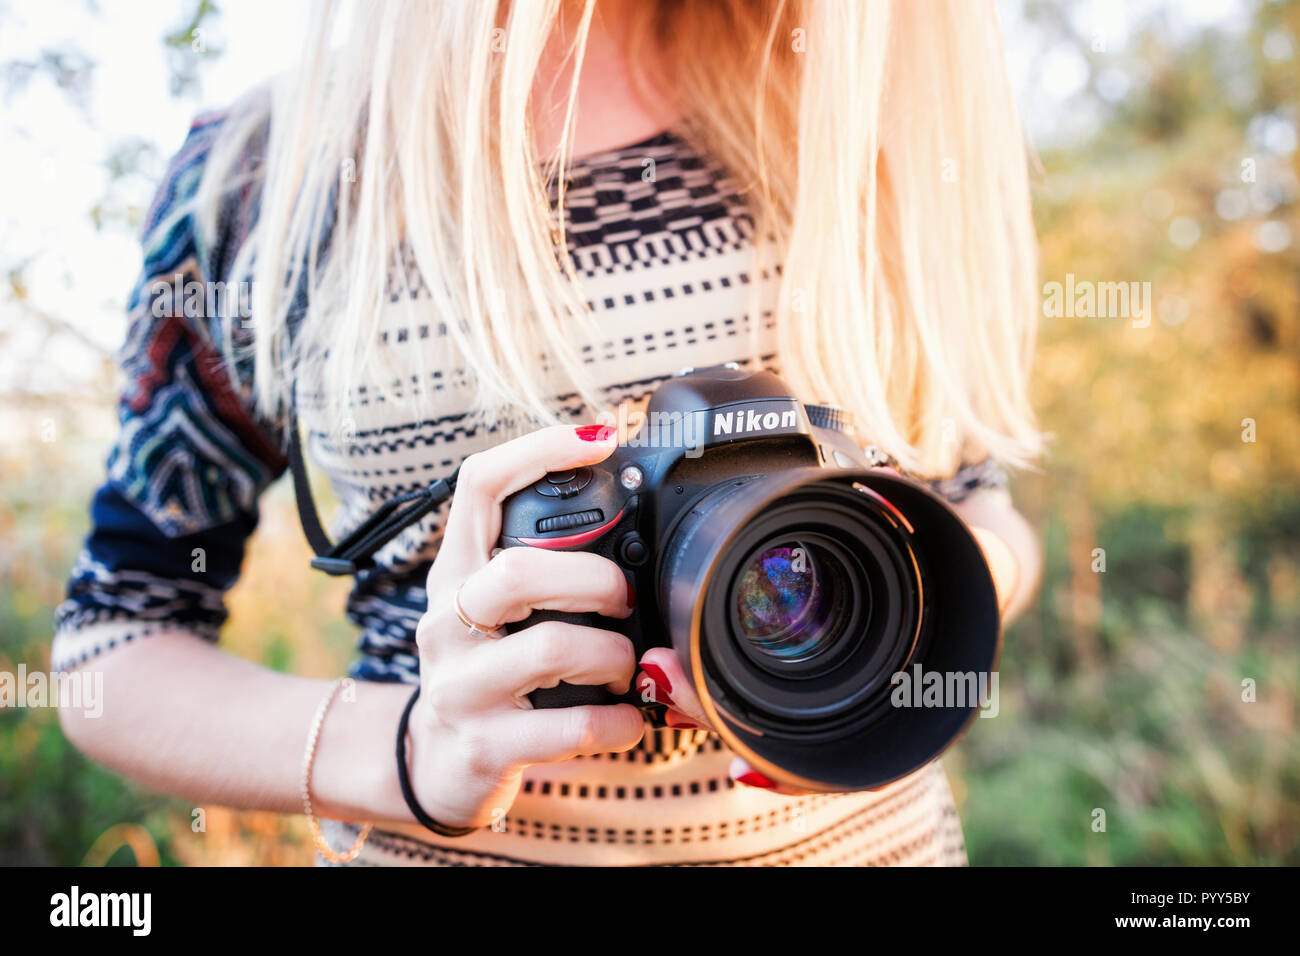 50mm Nikkor Lens High Resolution Stock Photography and Images - Alamy